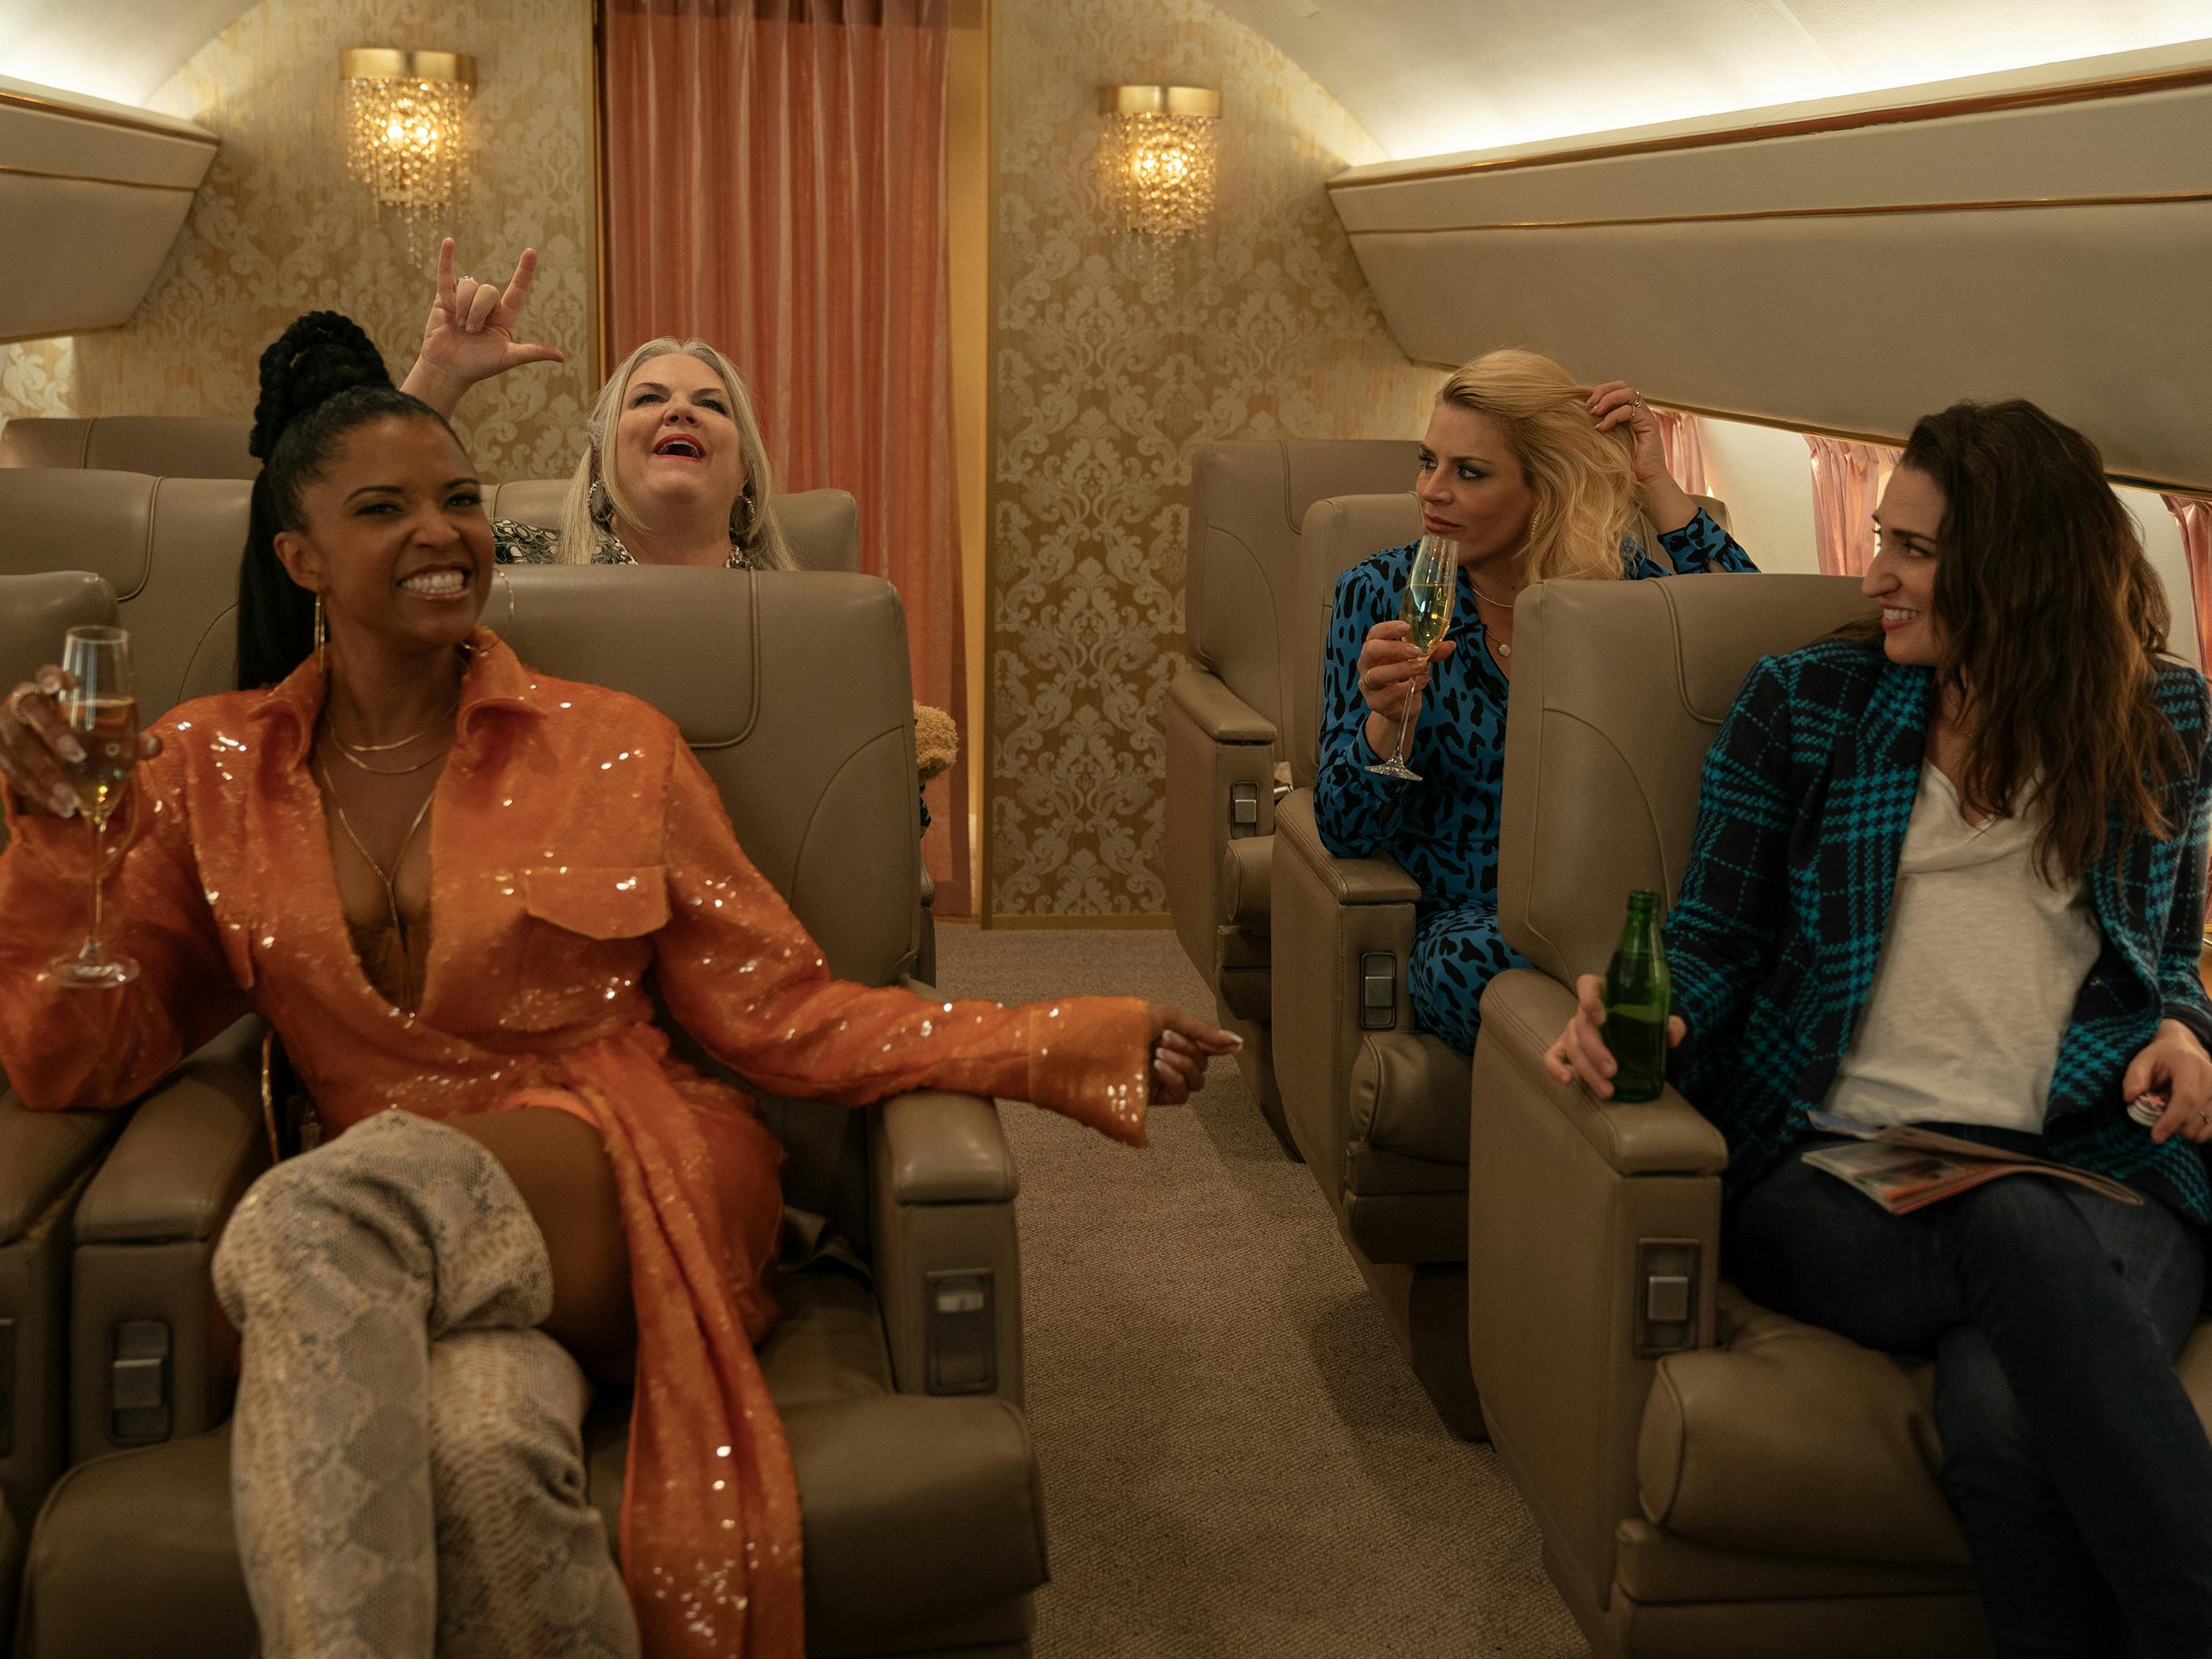 Wickie (Renée Elise Goldsberry), Gloria (Paula Pell), Summer (Busy Philipps), and Dawn (Sara Bareilles) sit on a private airplane.